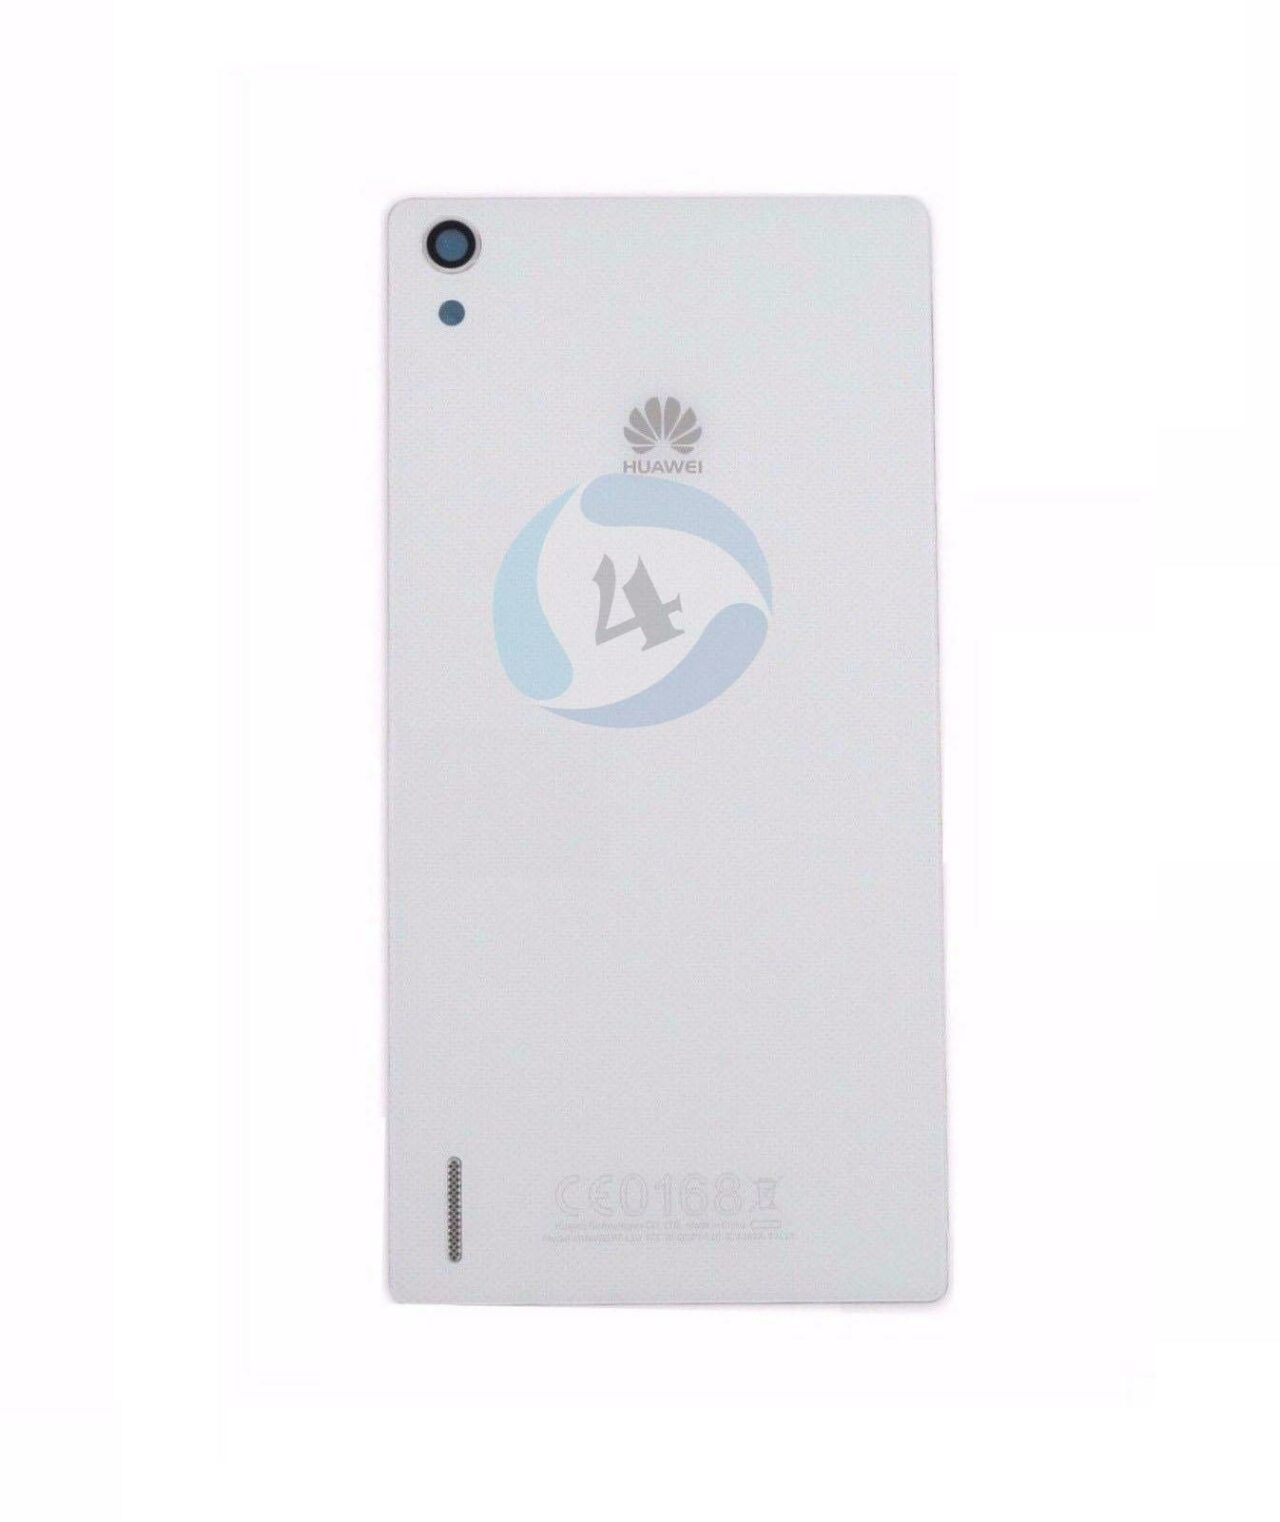 HUAWEI P7 backcover wit